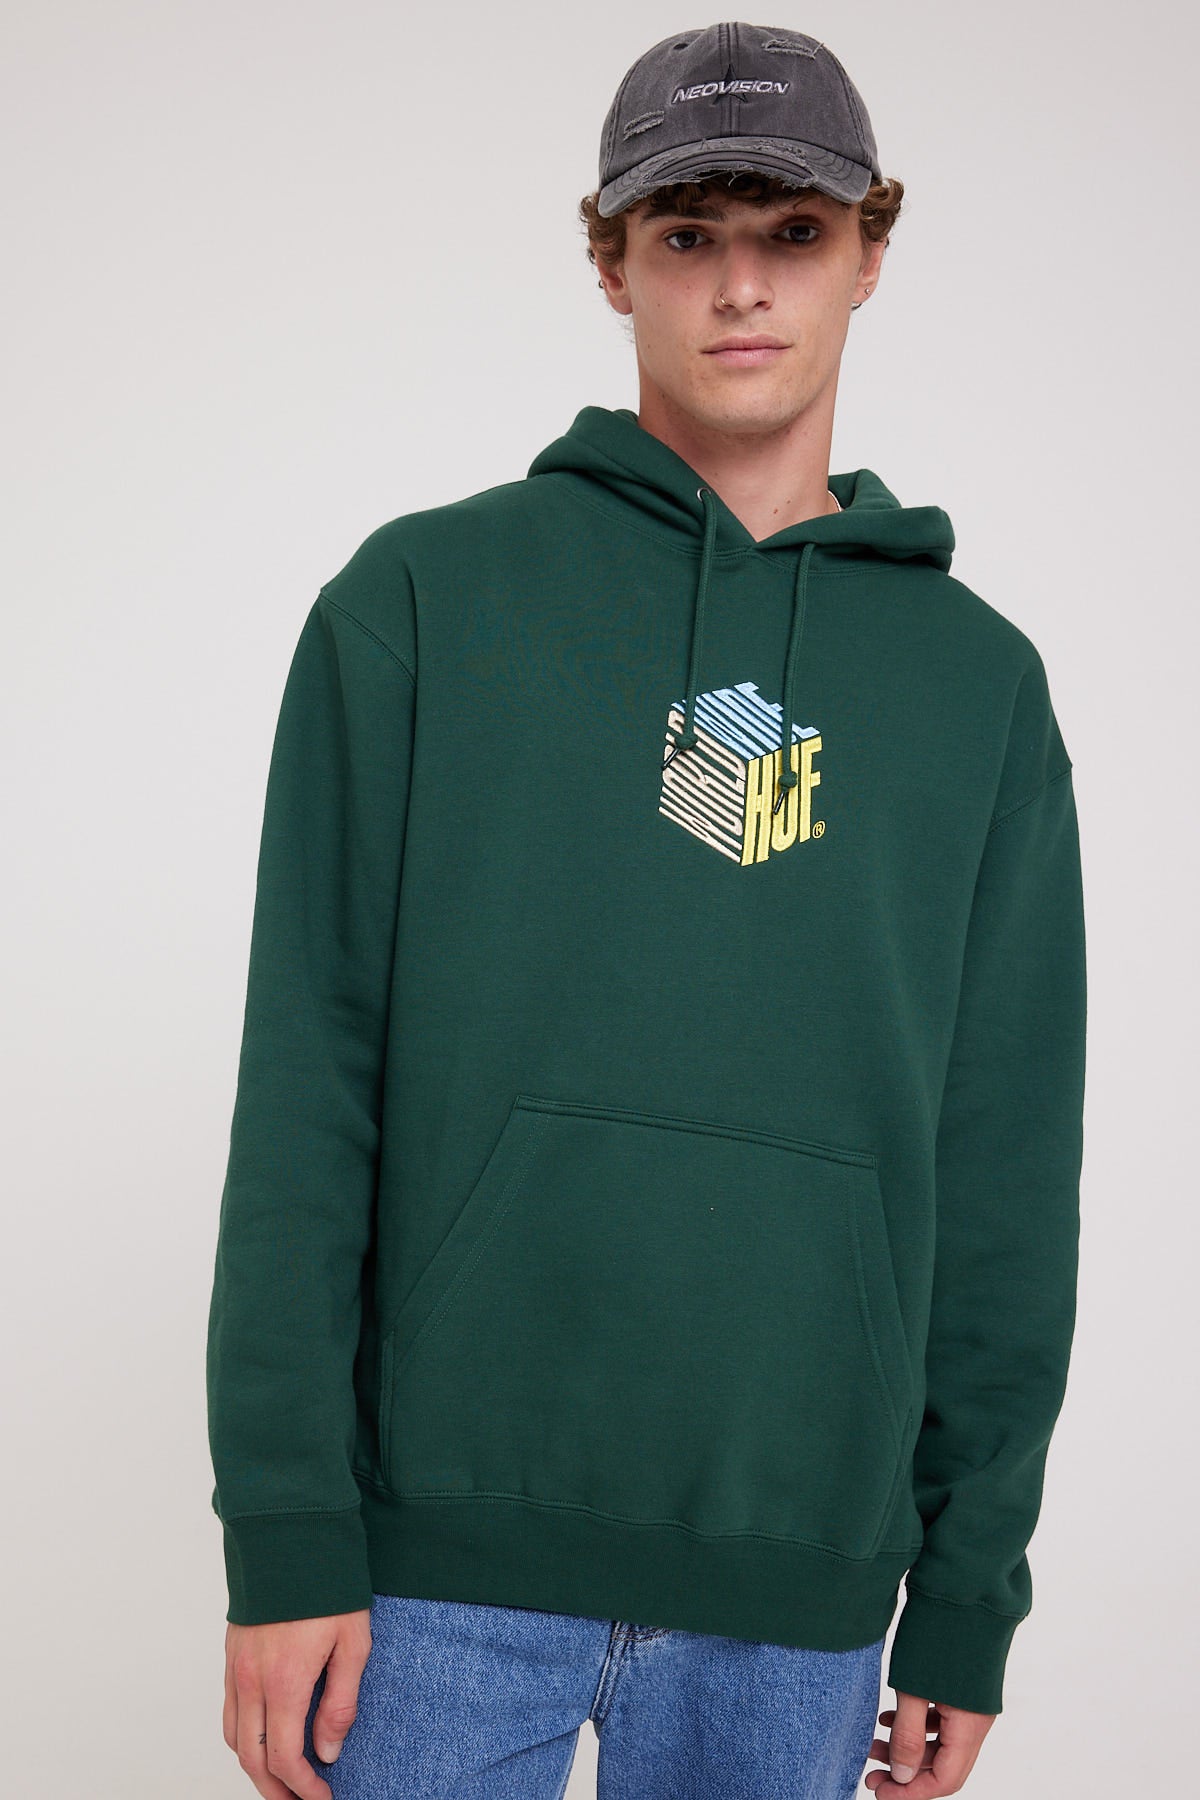 Huf Dimensions Hoody Forest Green